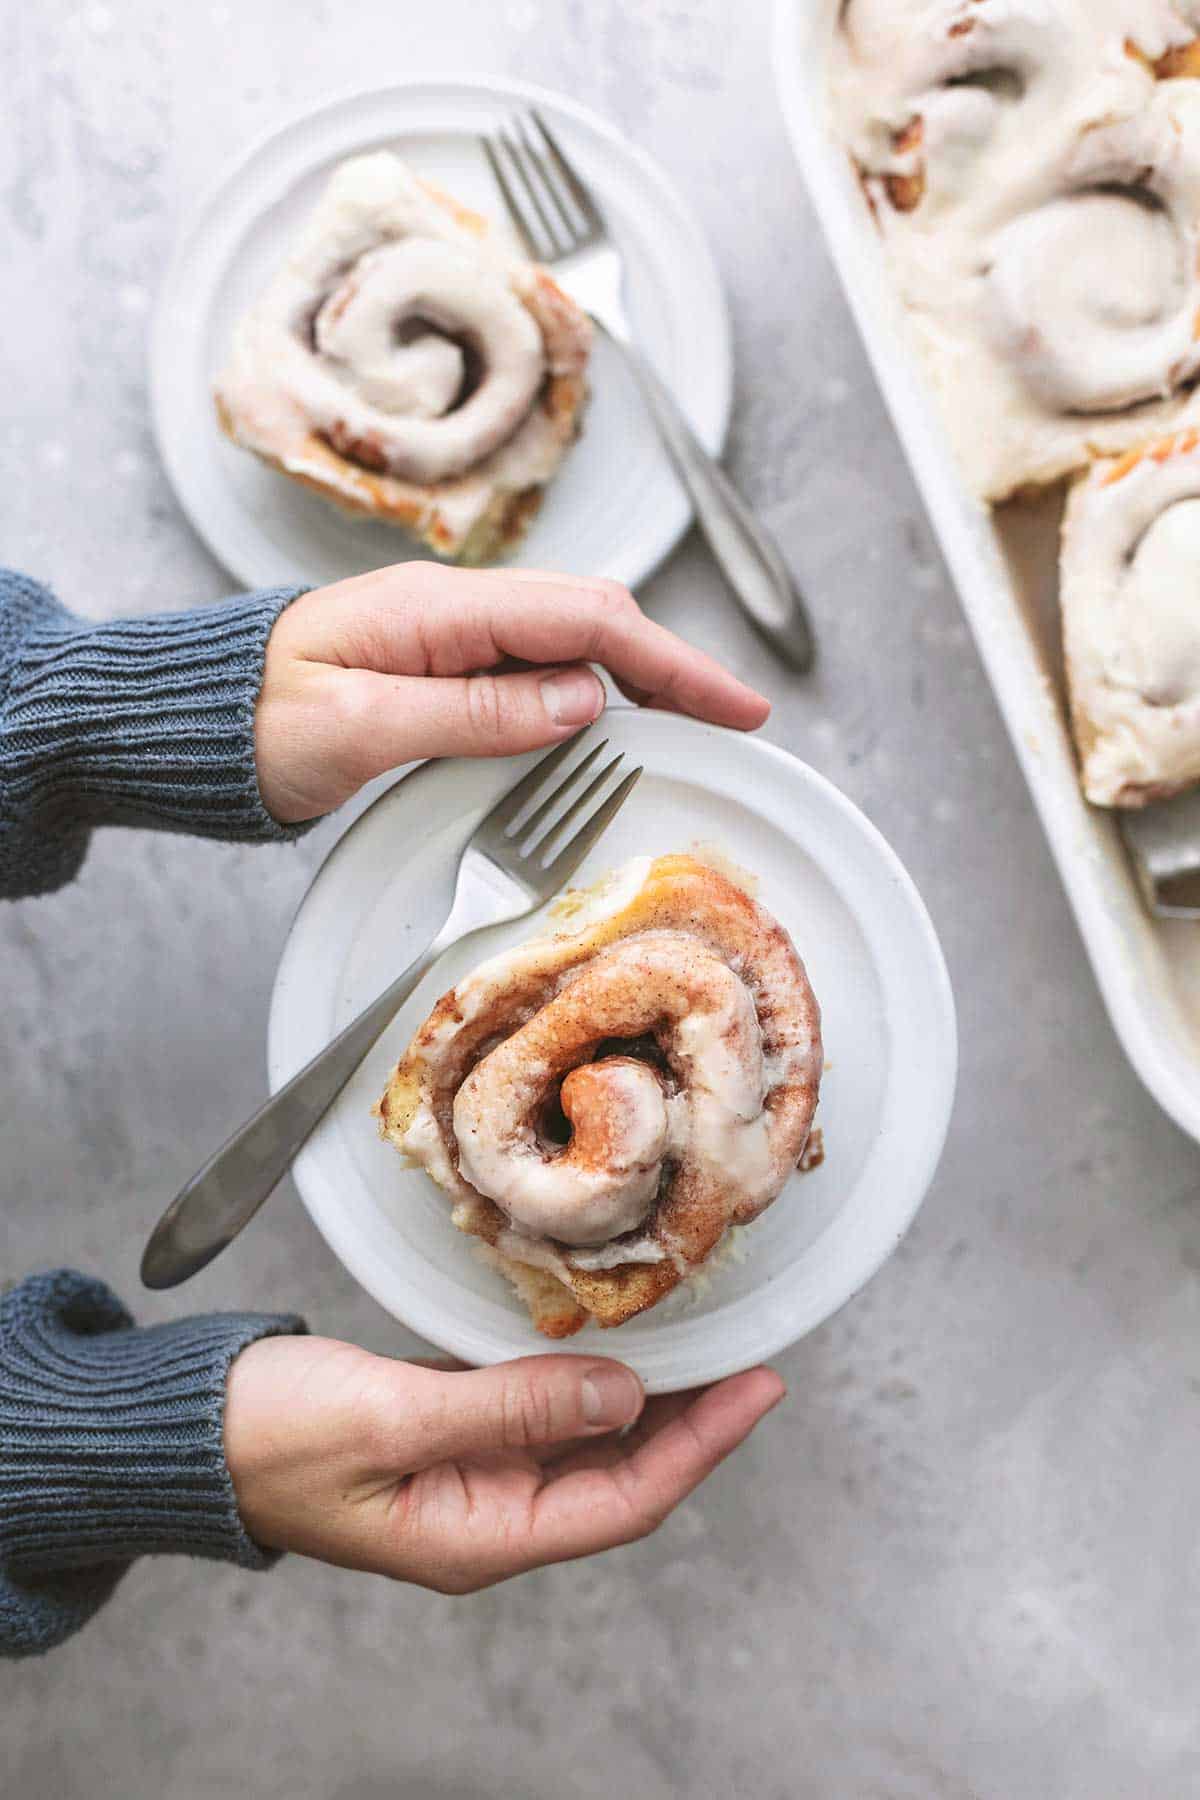 top view of hands holding a plate with a cinnamon roll with another plate and baking pan of rolls on the side.